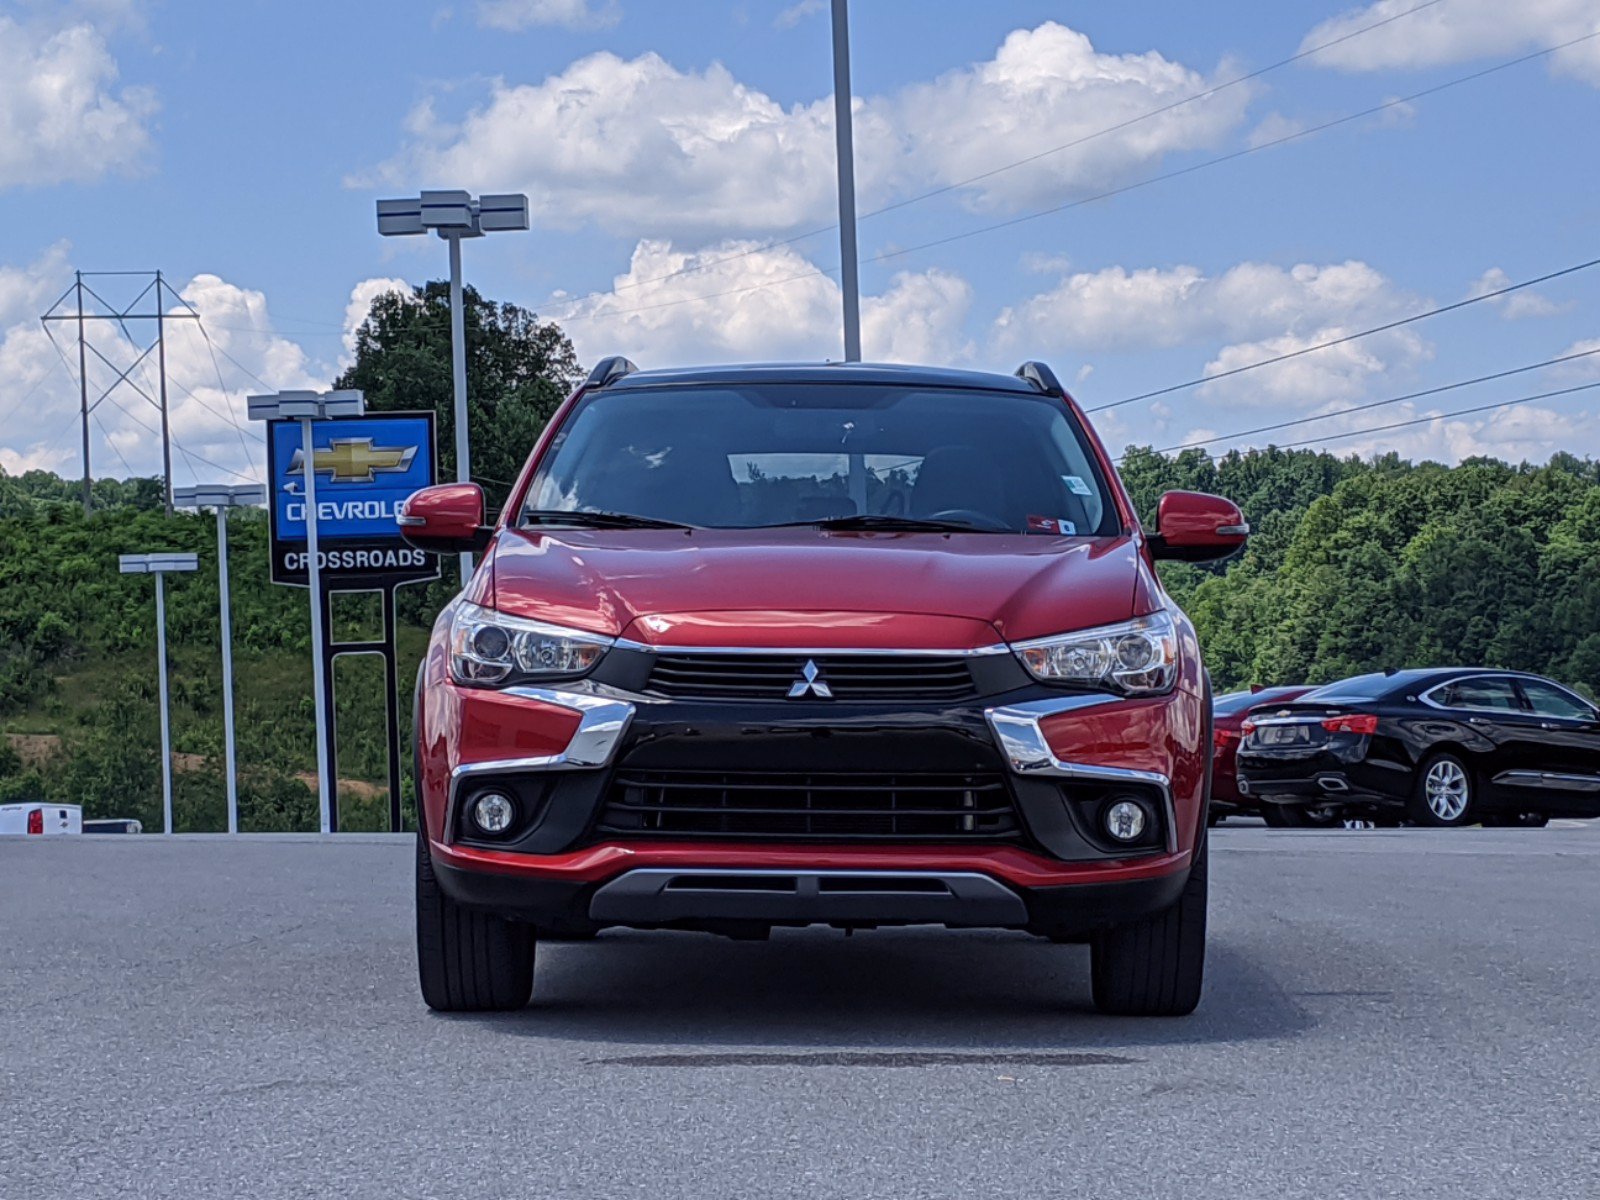 PreOwned 2016 Mitsubishi Outlander Sport 2.4 GT 4WD